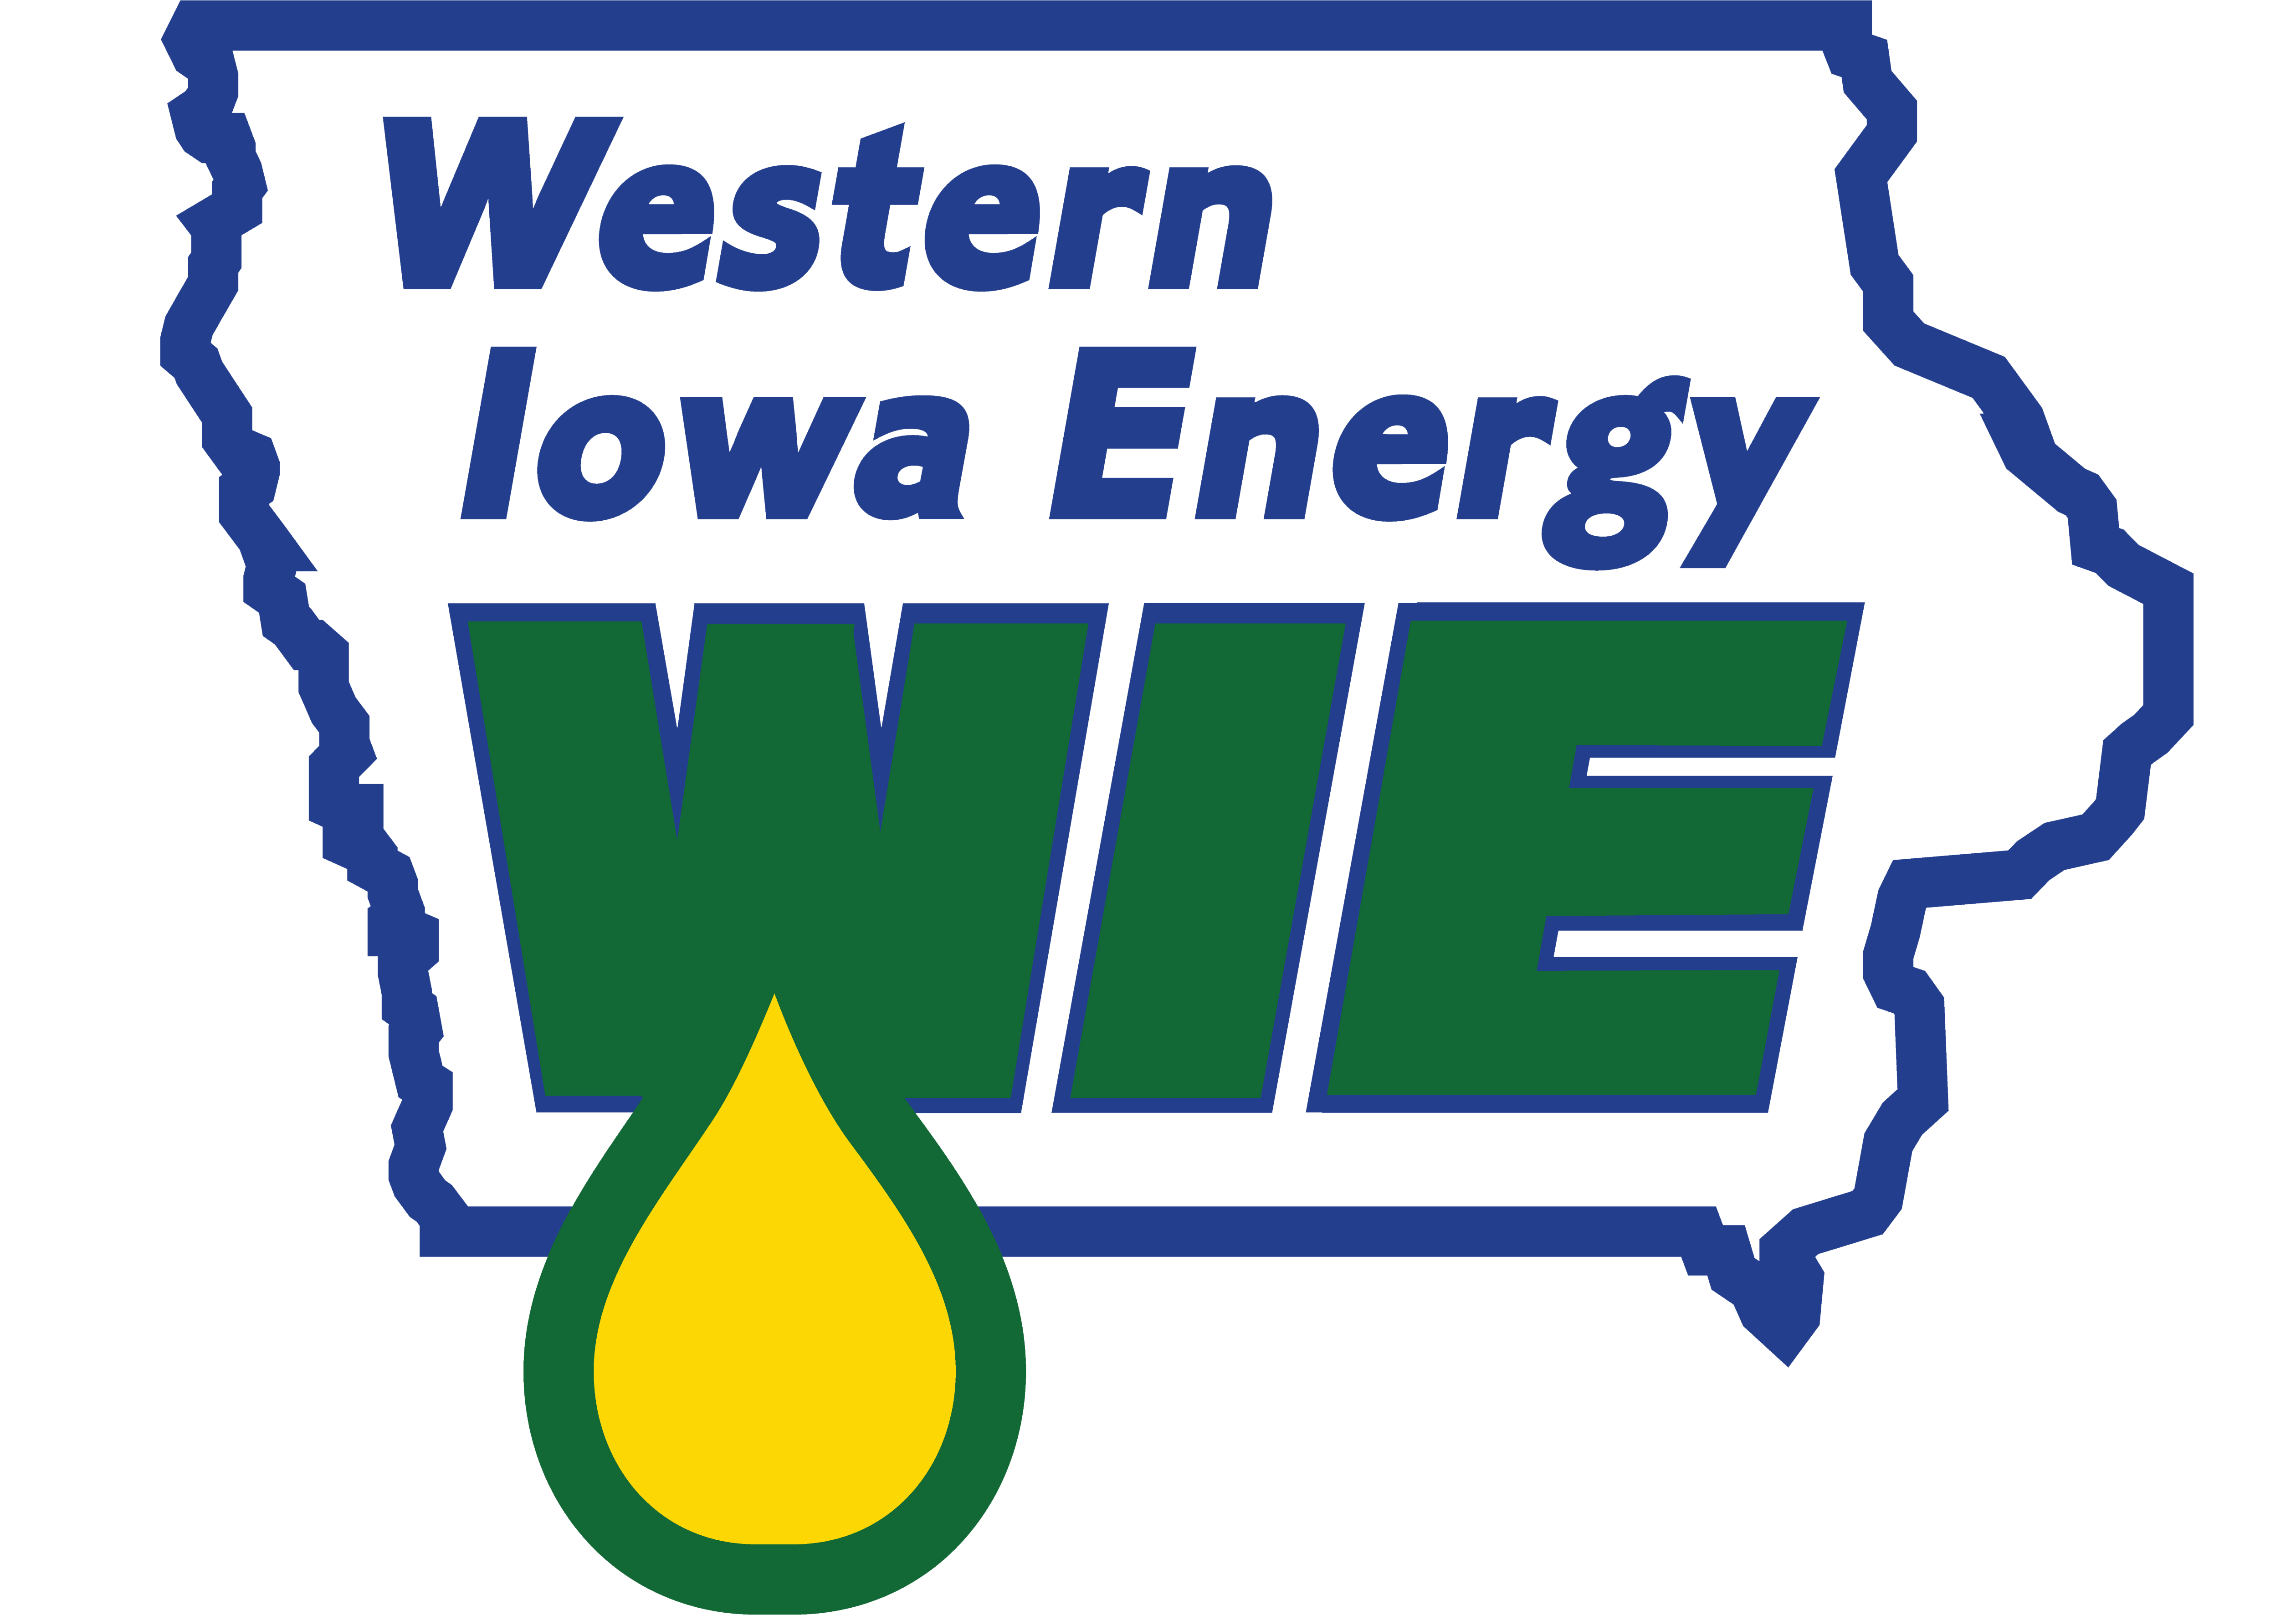 Western Iowa Energy is a leading biodiesel producer based in Wall Lake, Iowa. In 2017 the company purchased Agron Bioenergy, a biodiesel production facility in Watsonville, California.